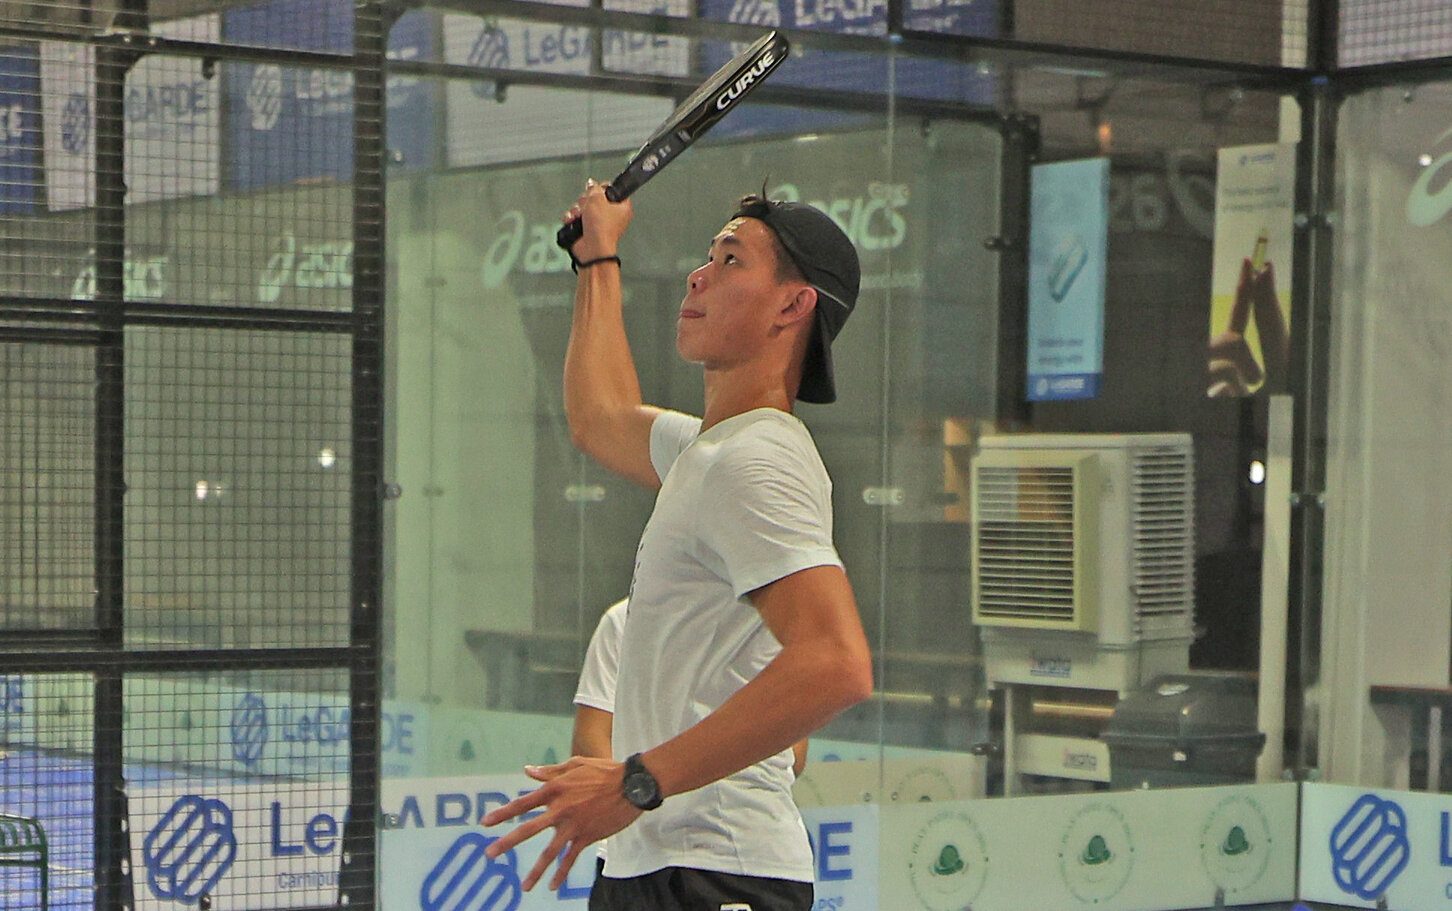 What’s padel? Obiena, Cayetano try out the growing sport